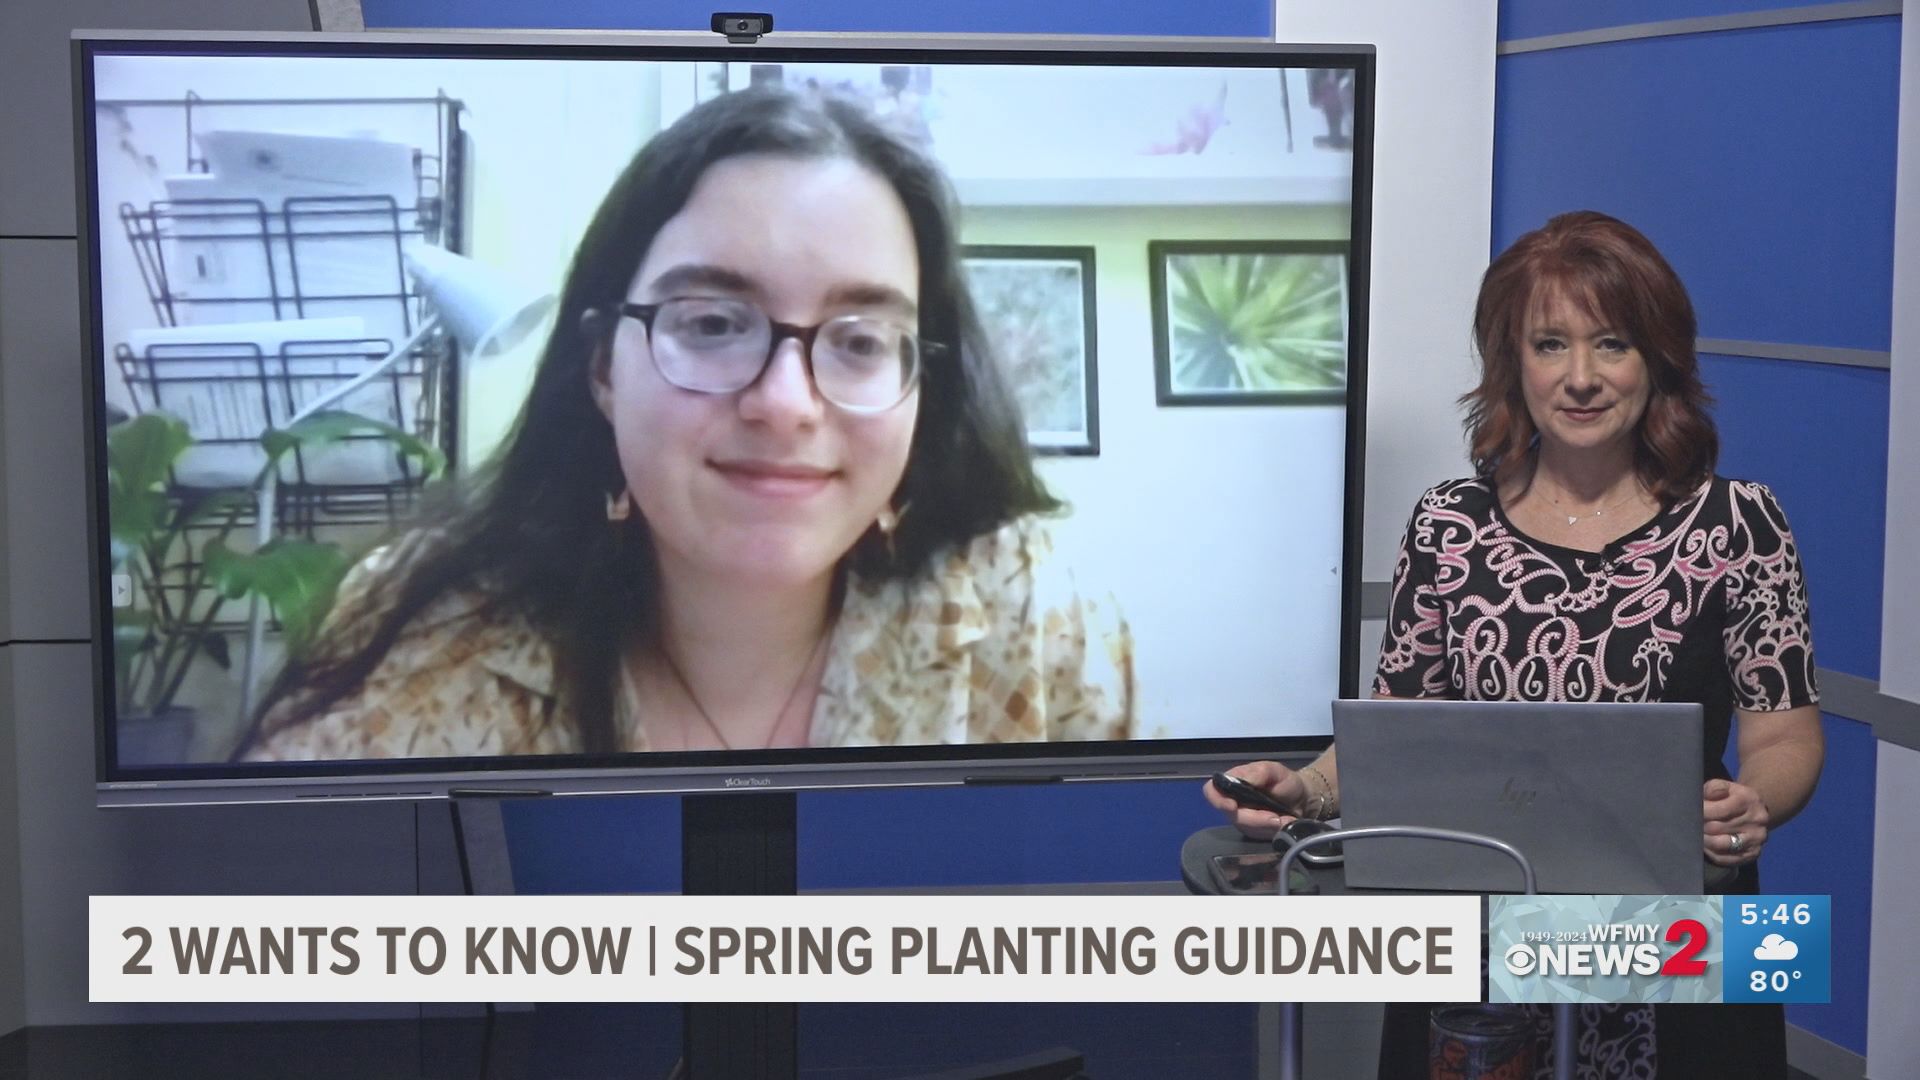 2 Wants to Know talks to an expert about the do's and don'ts of planting this spring as temperatures warm up.